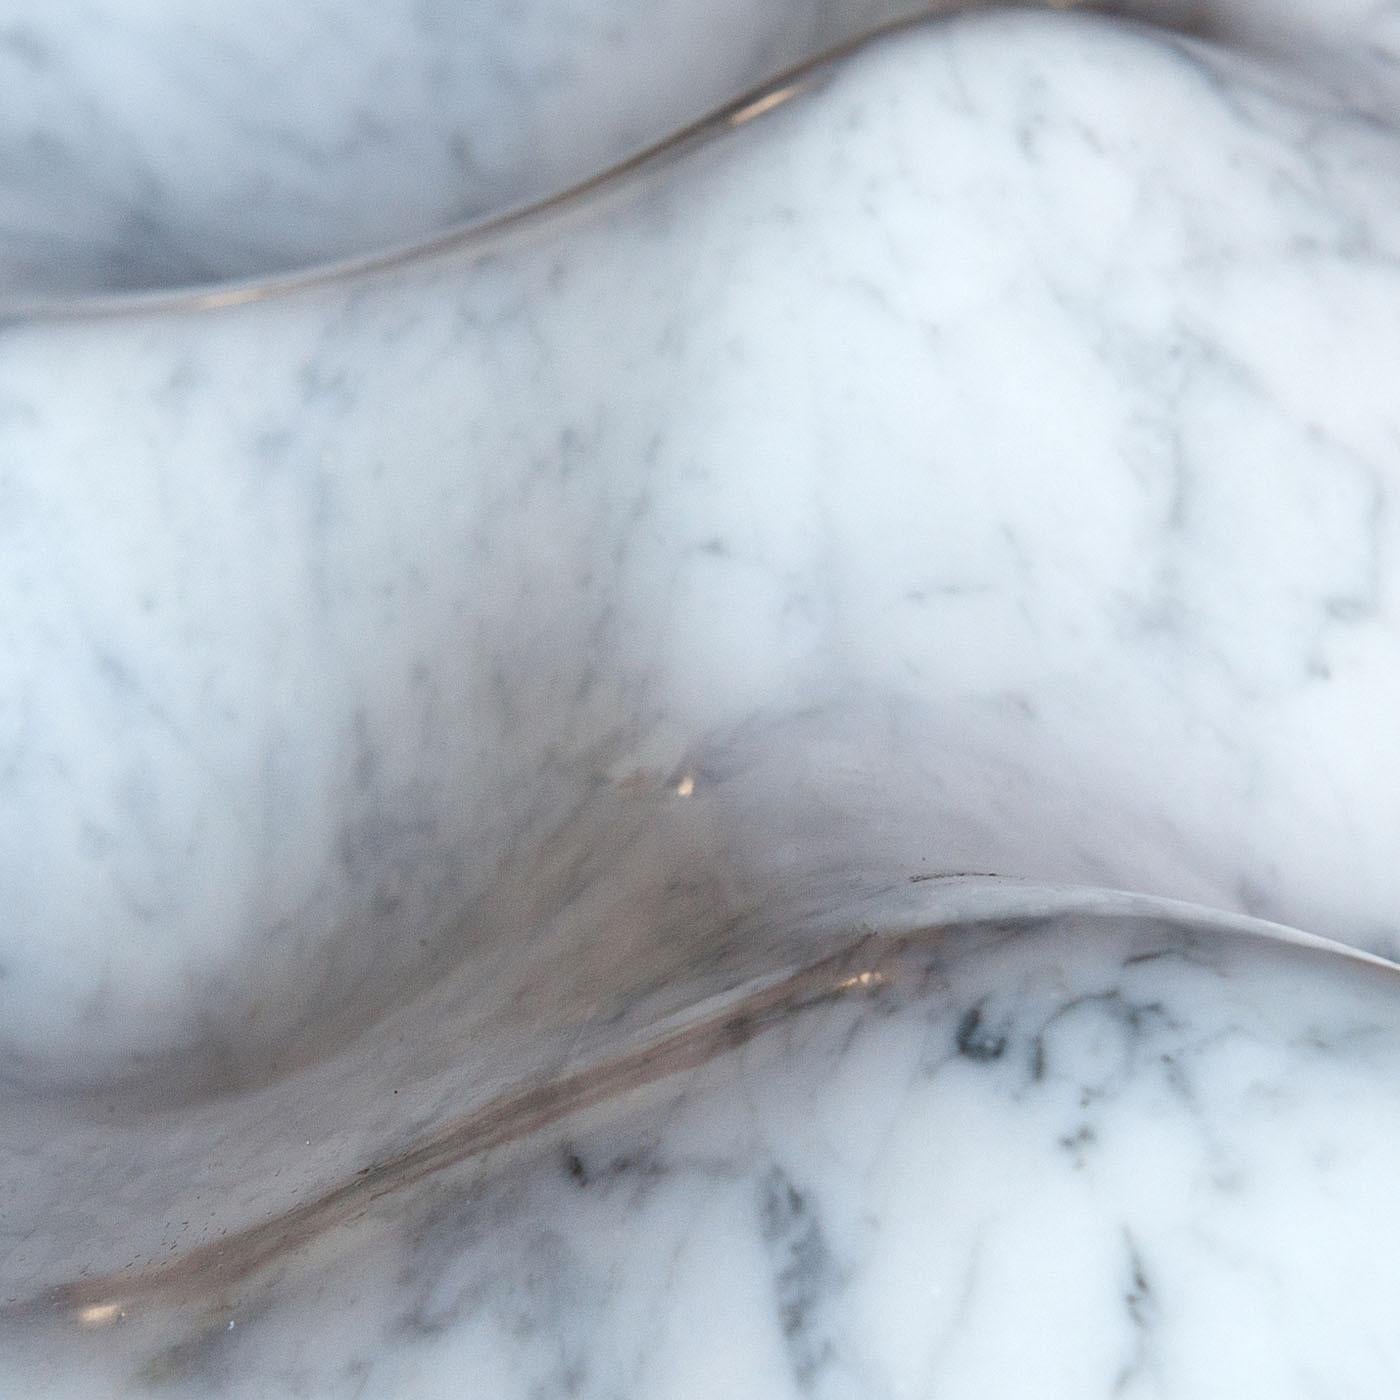 Marked by a sleek and sinuous shape that elevates the pure essence of white Carrara marble to timeless sophistication, this centerpiece will make for an elegant and refined accent to a contemporary dining table. Recalling sand dunes shaped by the